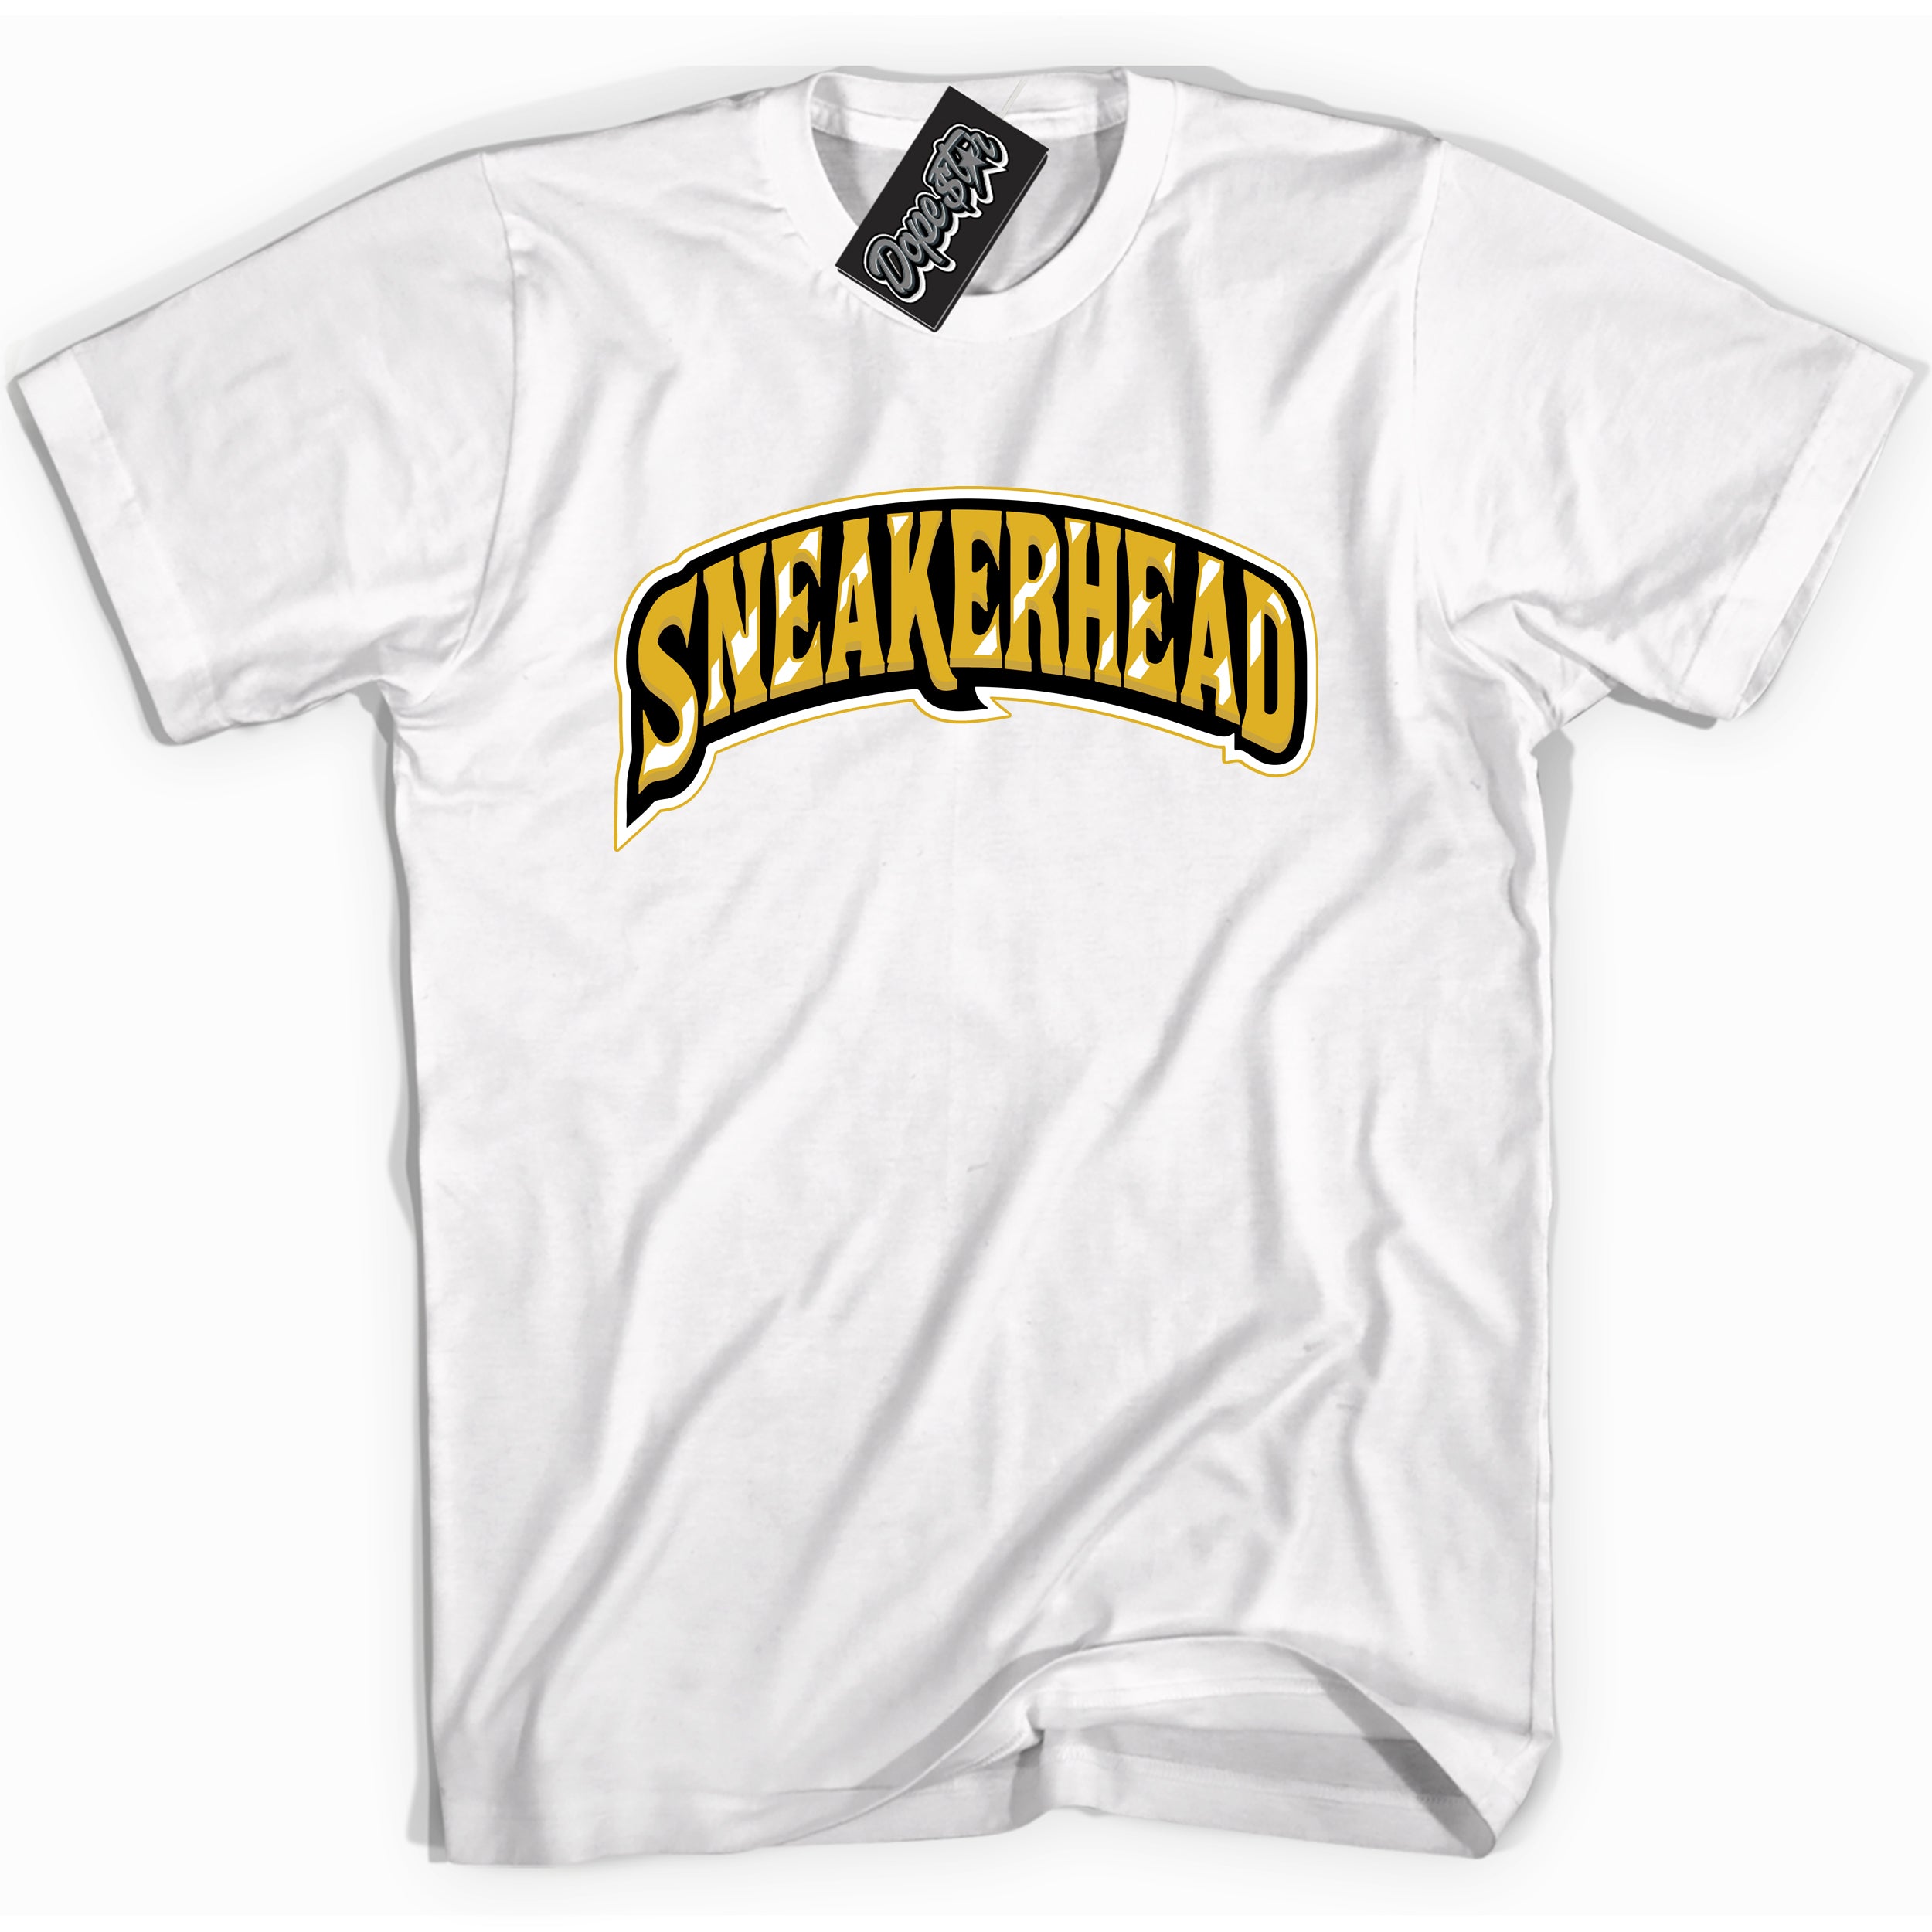 Cool White Shirt with “ Sneakerhead” design that perfectly matches Yellow Ochre 6s Sneakers.